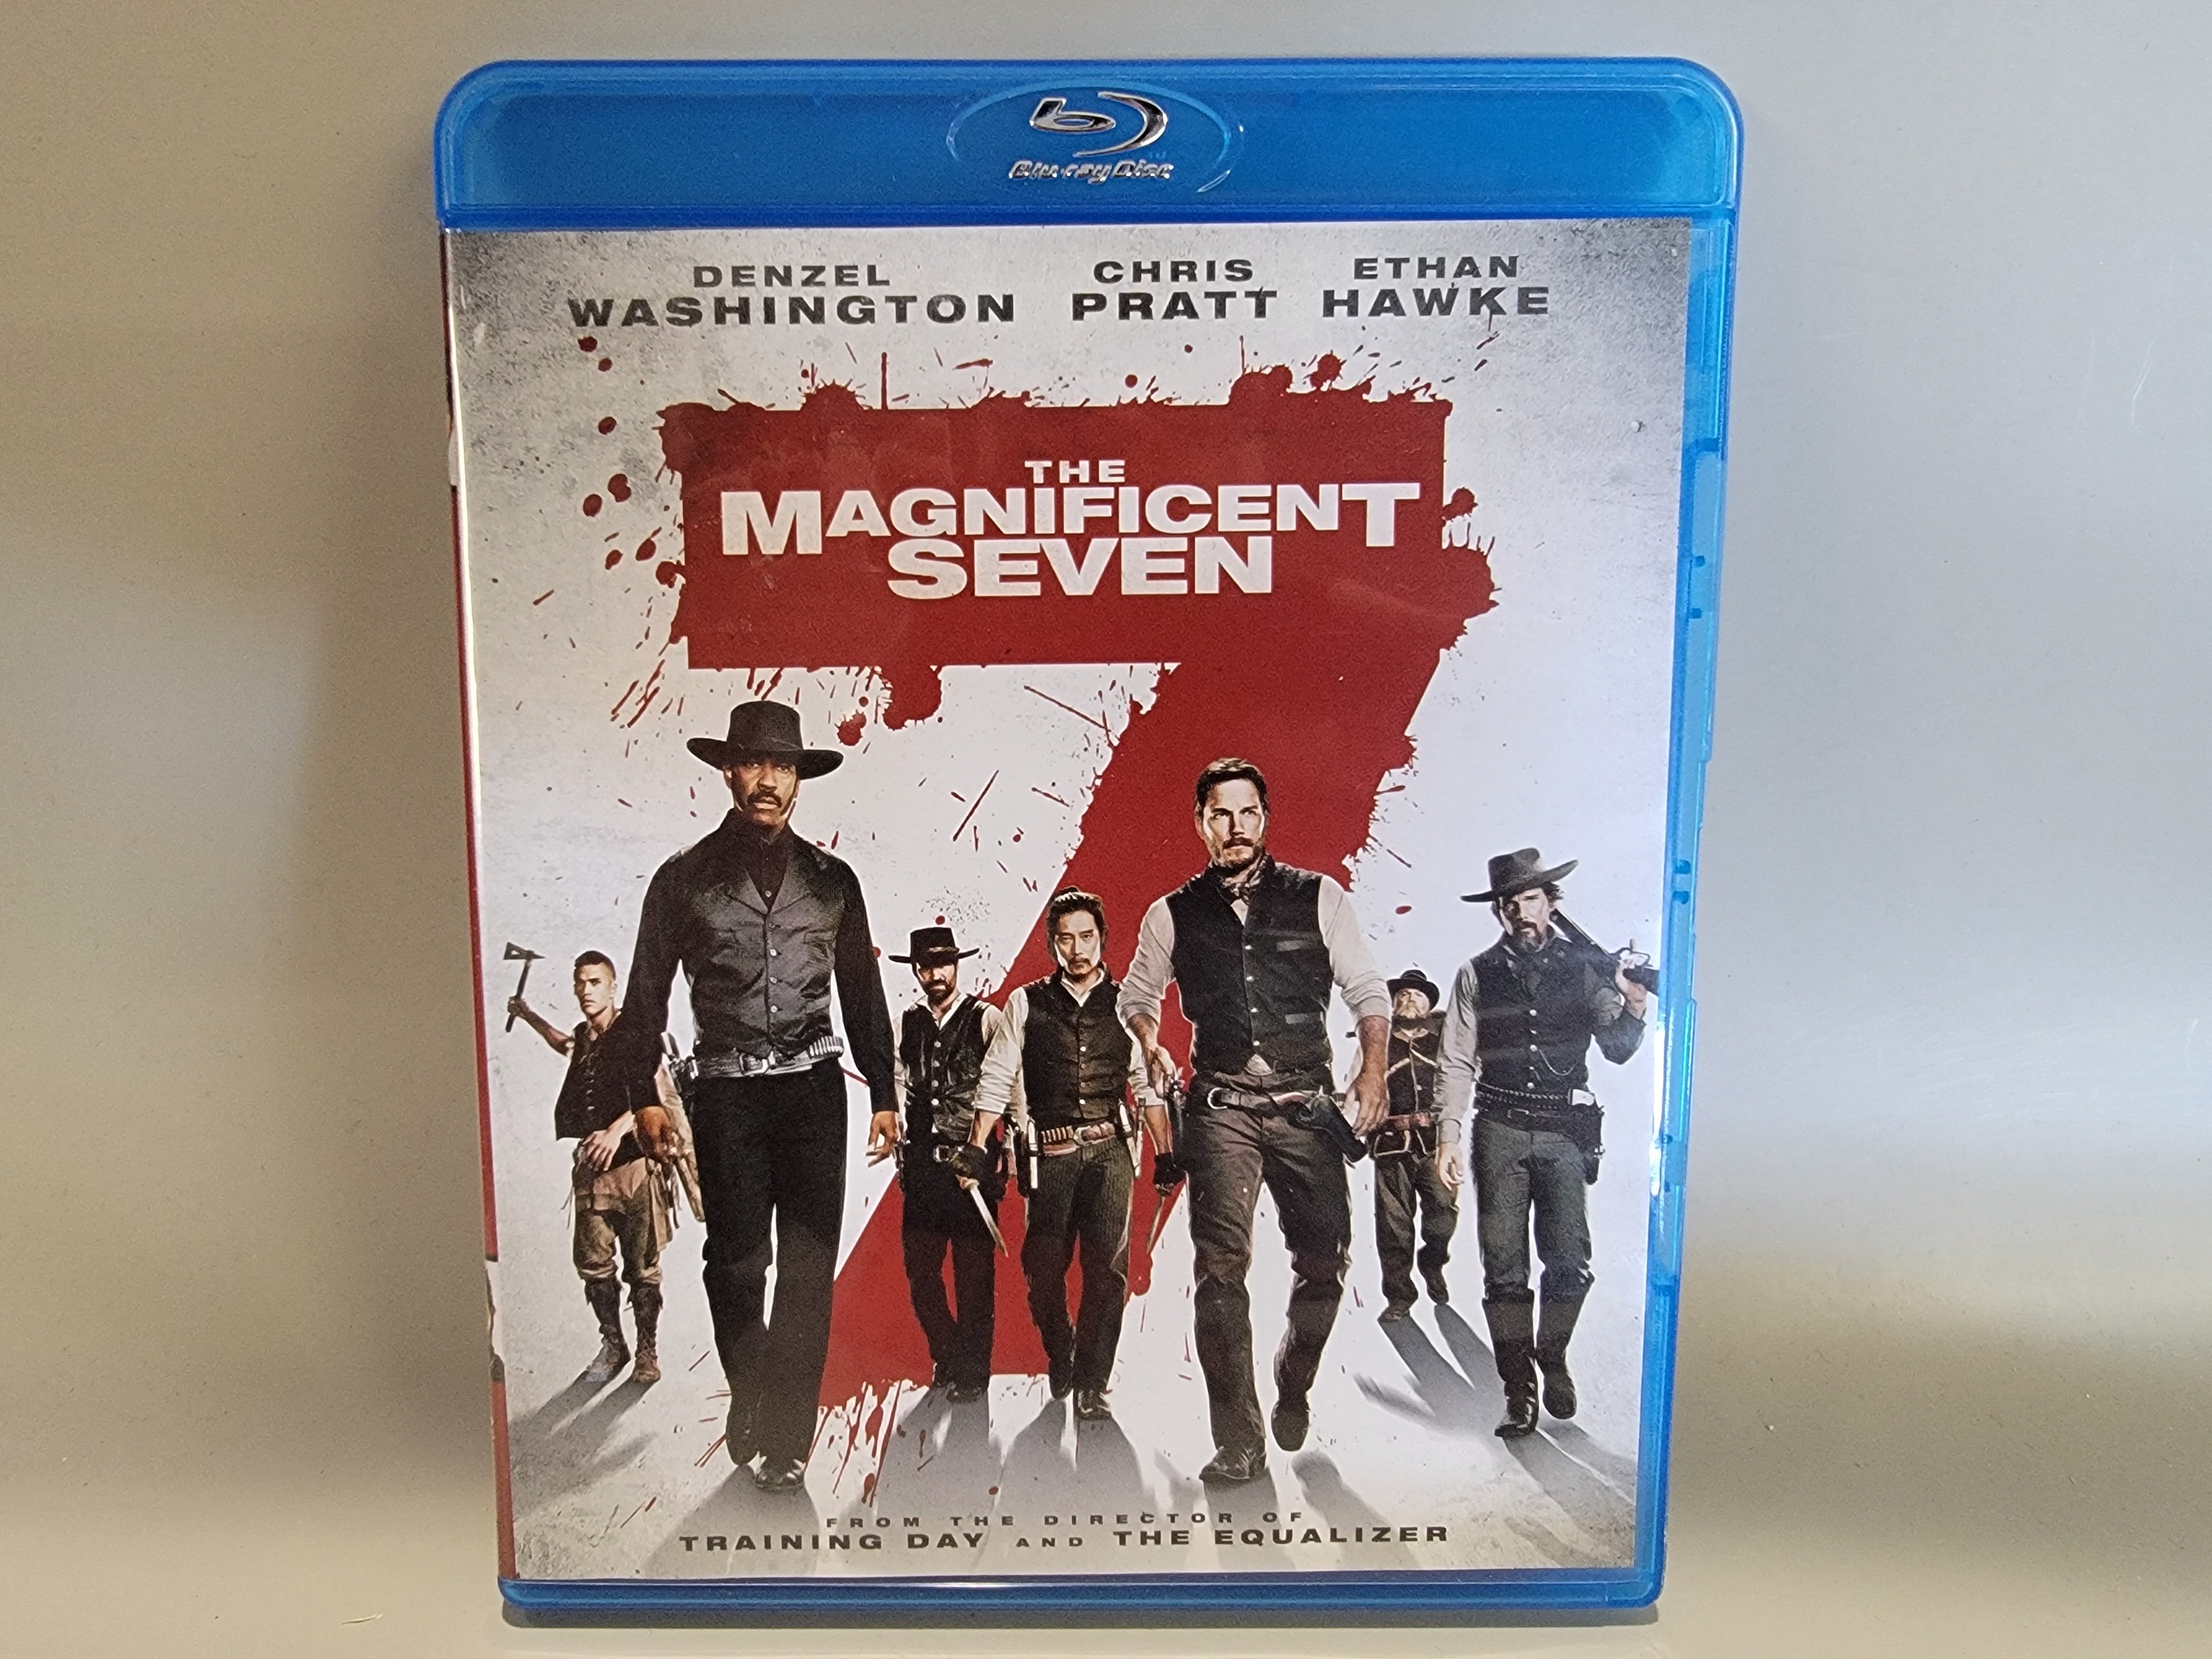 THE MAGNIFICENT SEVEN (2016) BLU-RAY [USED]